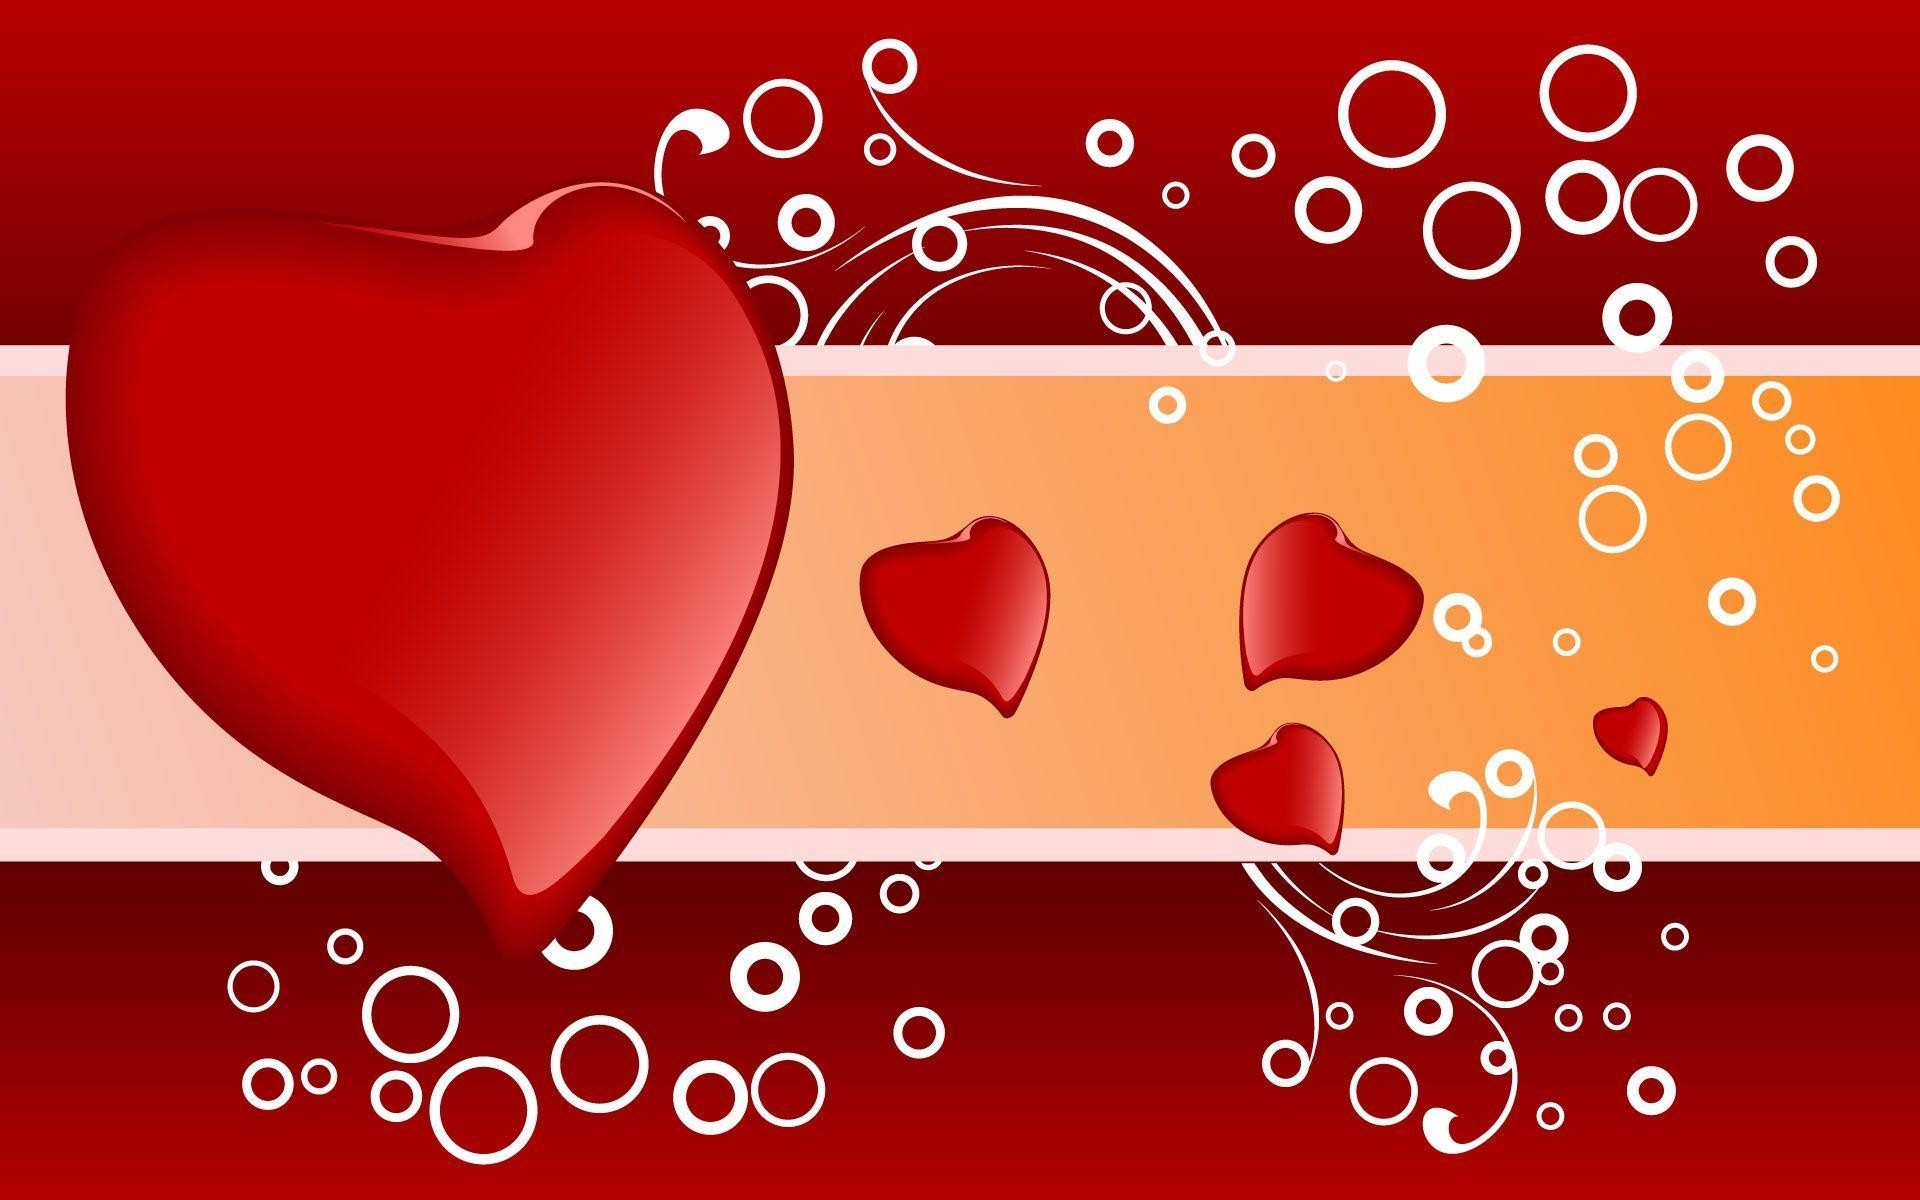 1920x1200 1920x1080 CG animation, heart shaped chips dropping, background, love, red.